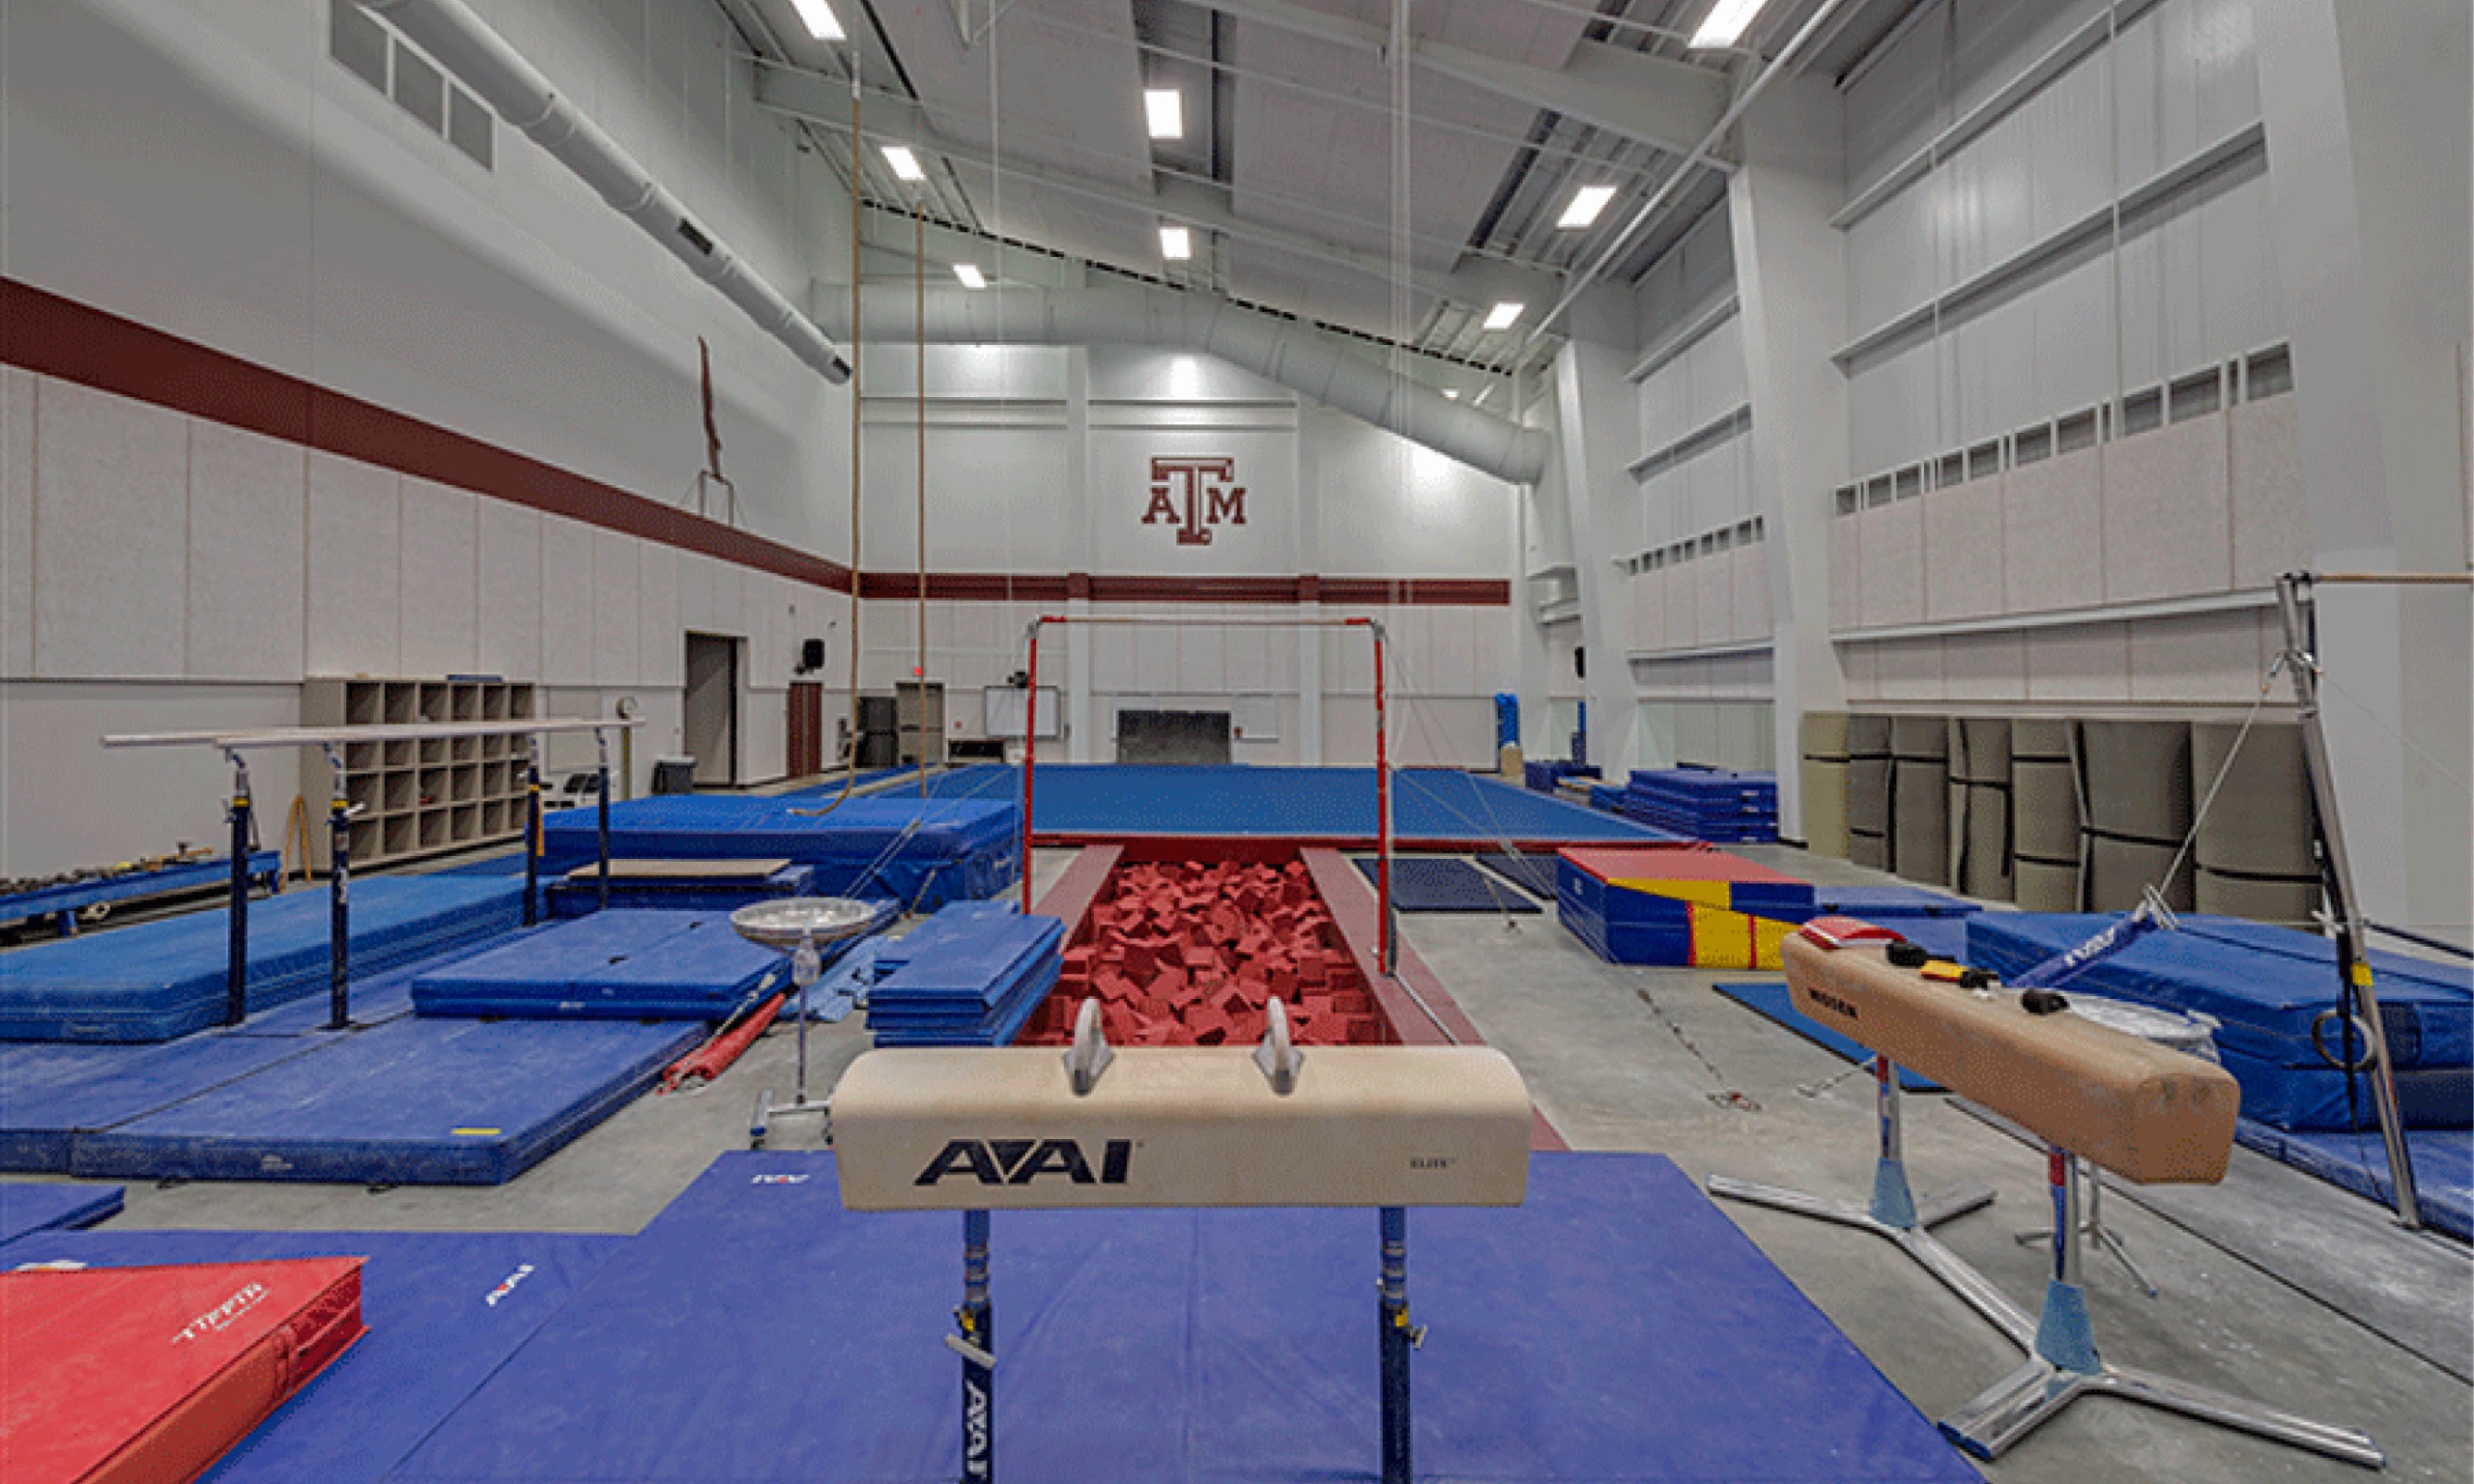 A spacious gymnastics gym filled with mats and equipment, offering ample room for gymnasts to practice and perform their routines.